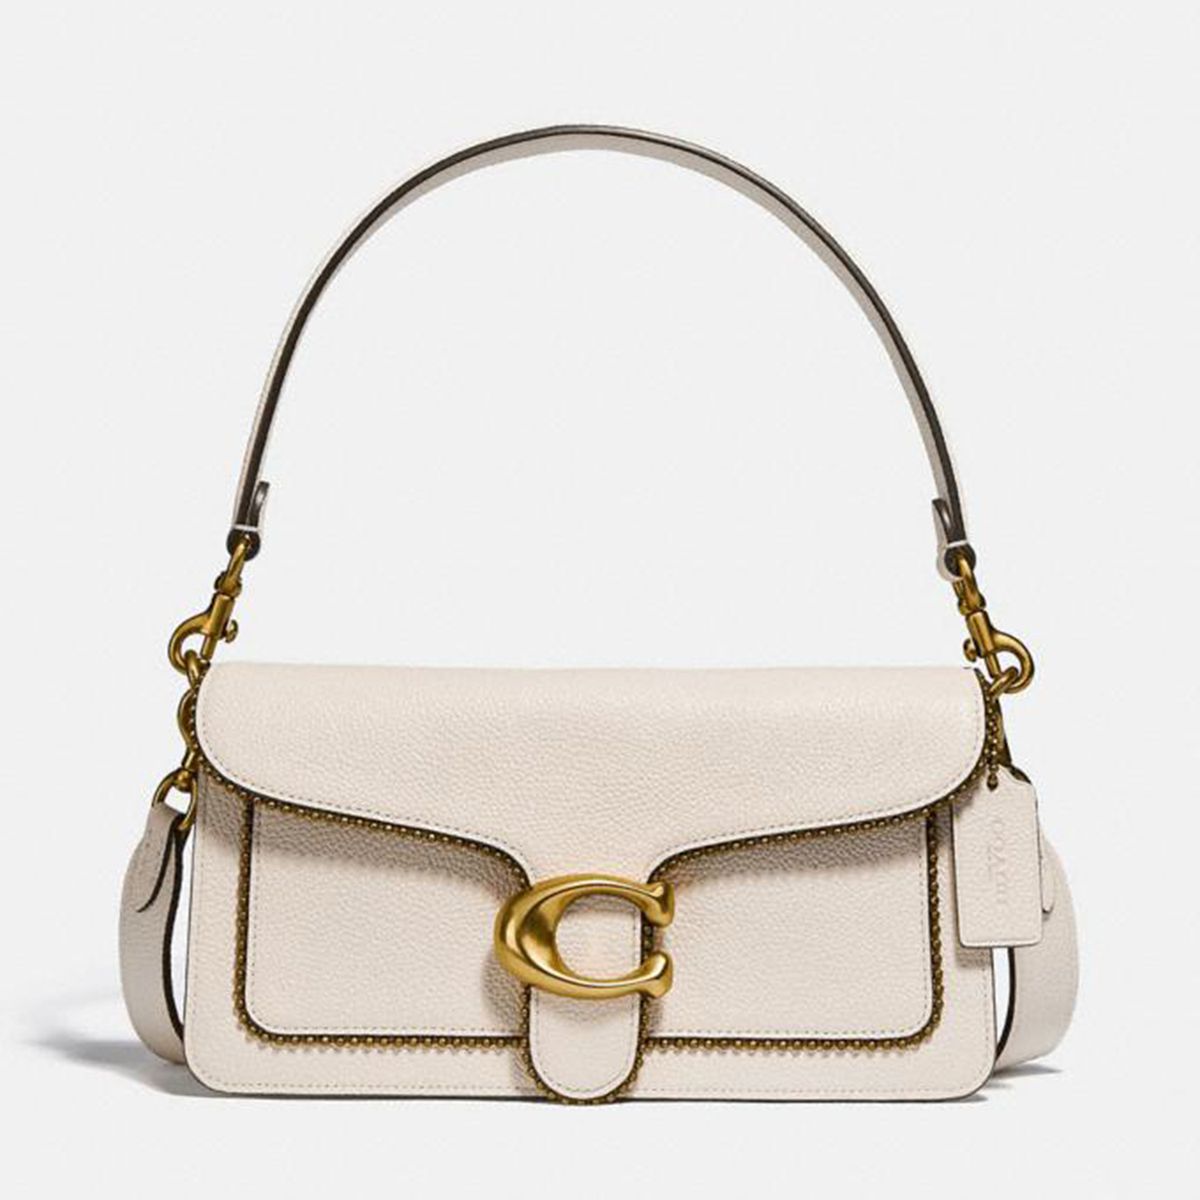 Coach Black Friday 2020: Best Purse Deals to Shop | InStyle